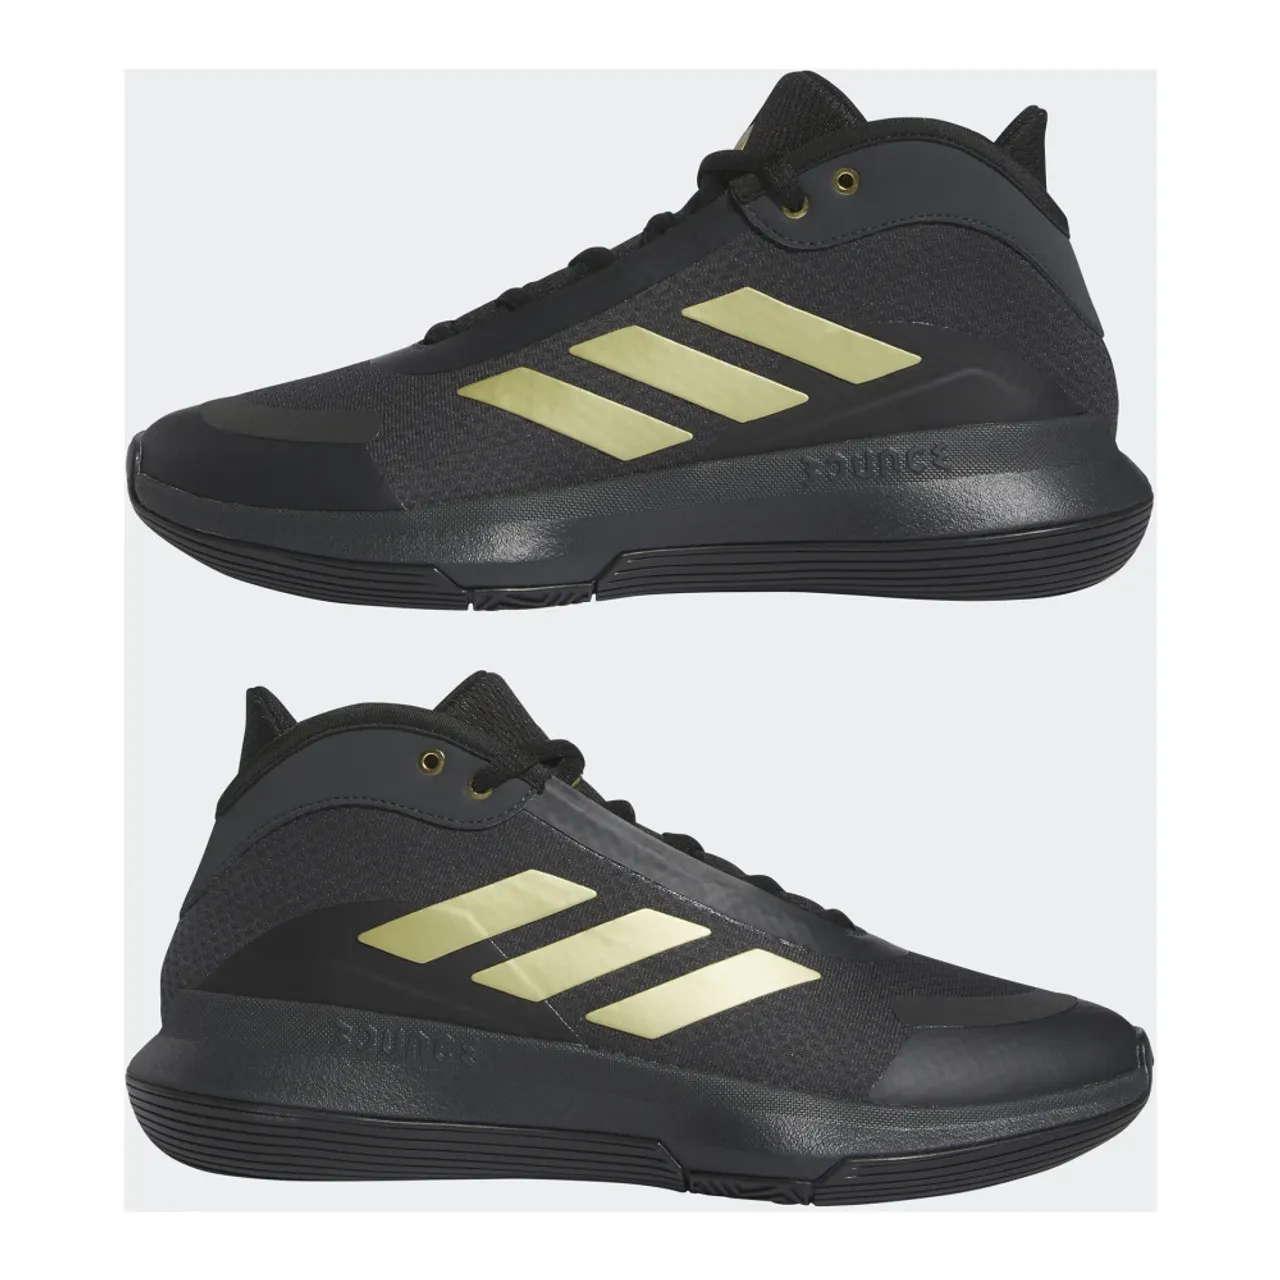 Adidas , Bounce Legends Sneakers ,Black male, Sizes: